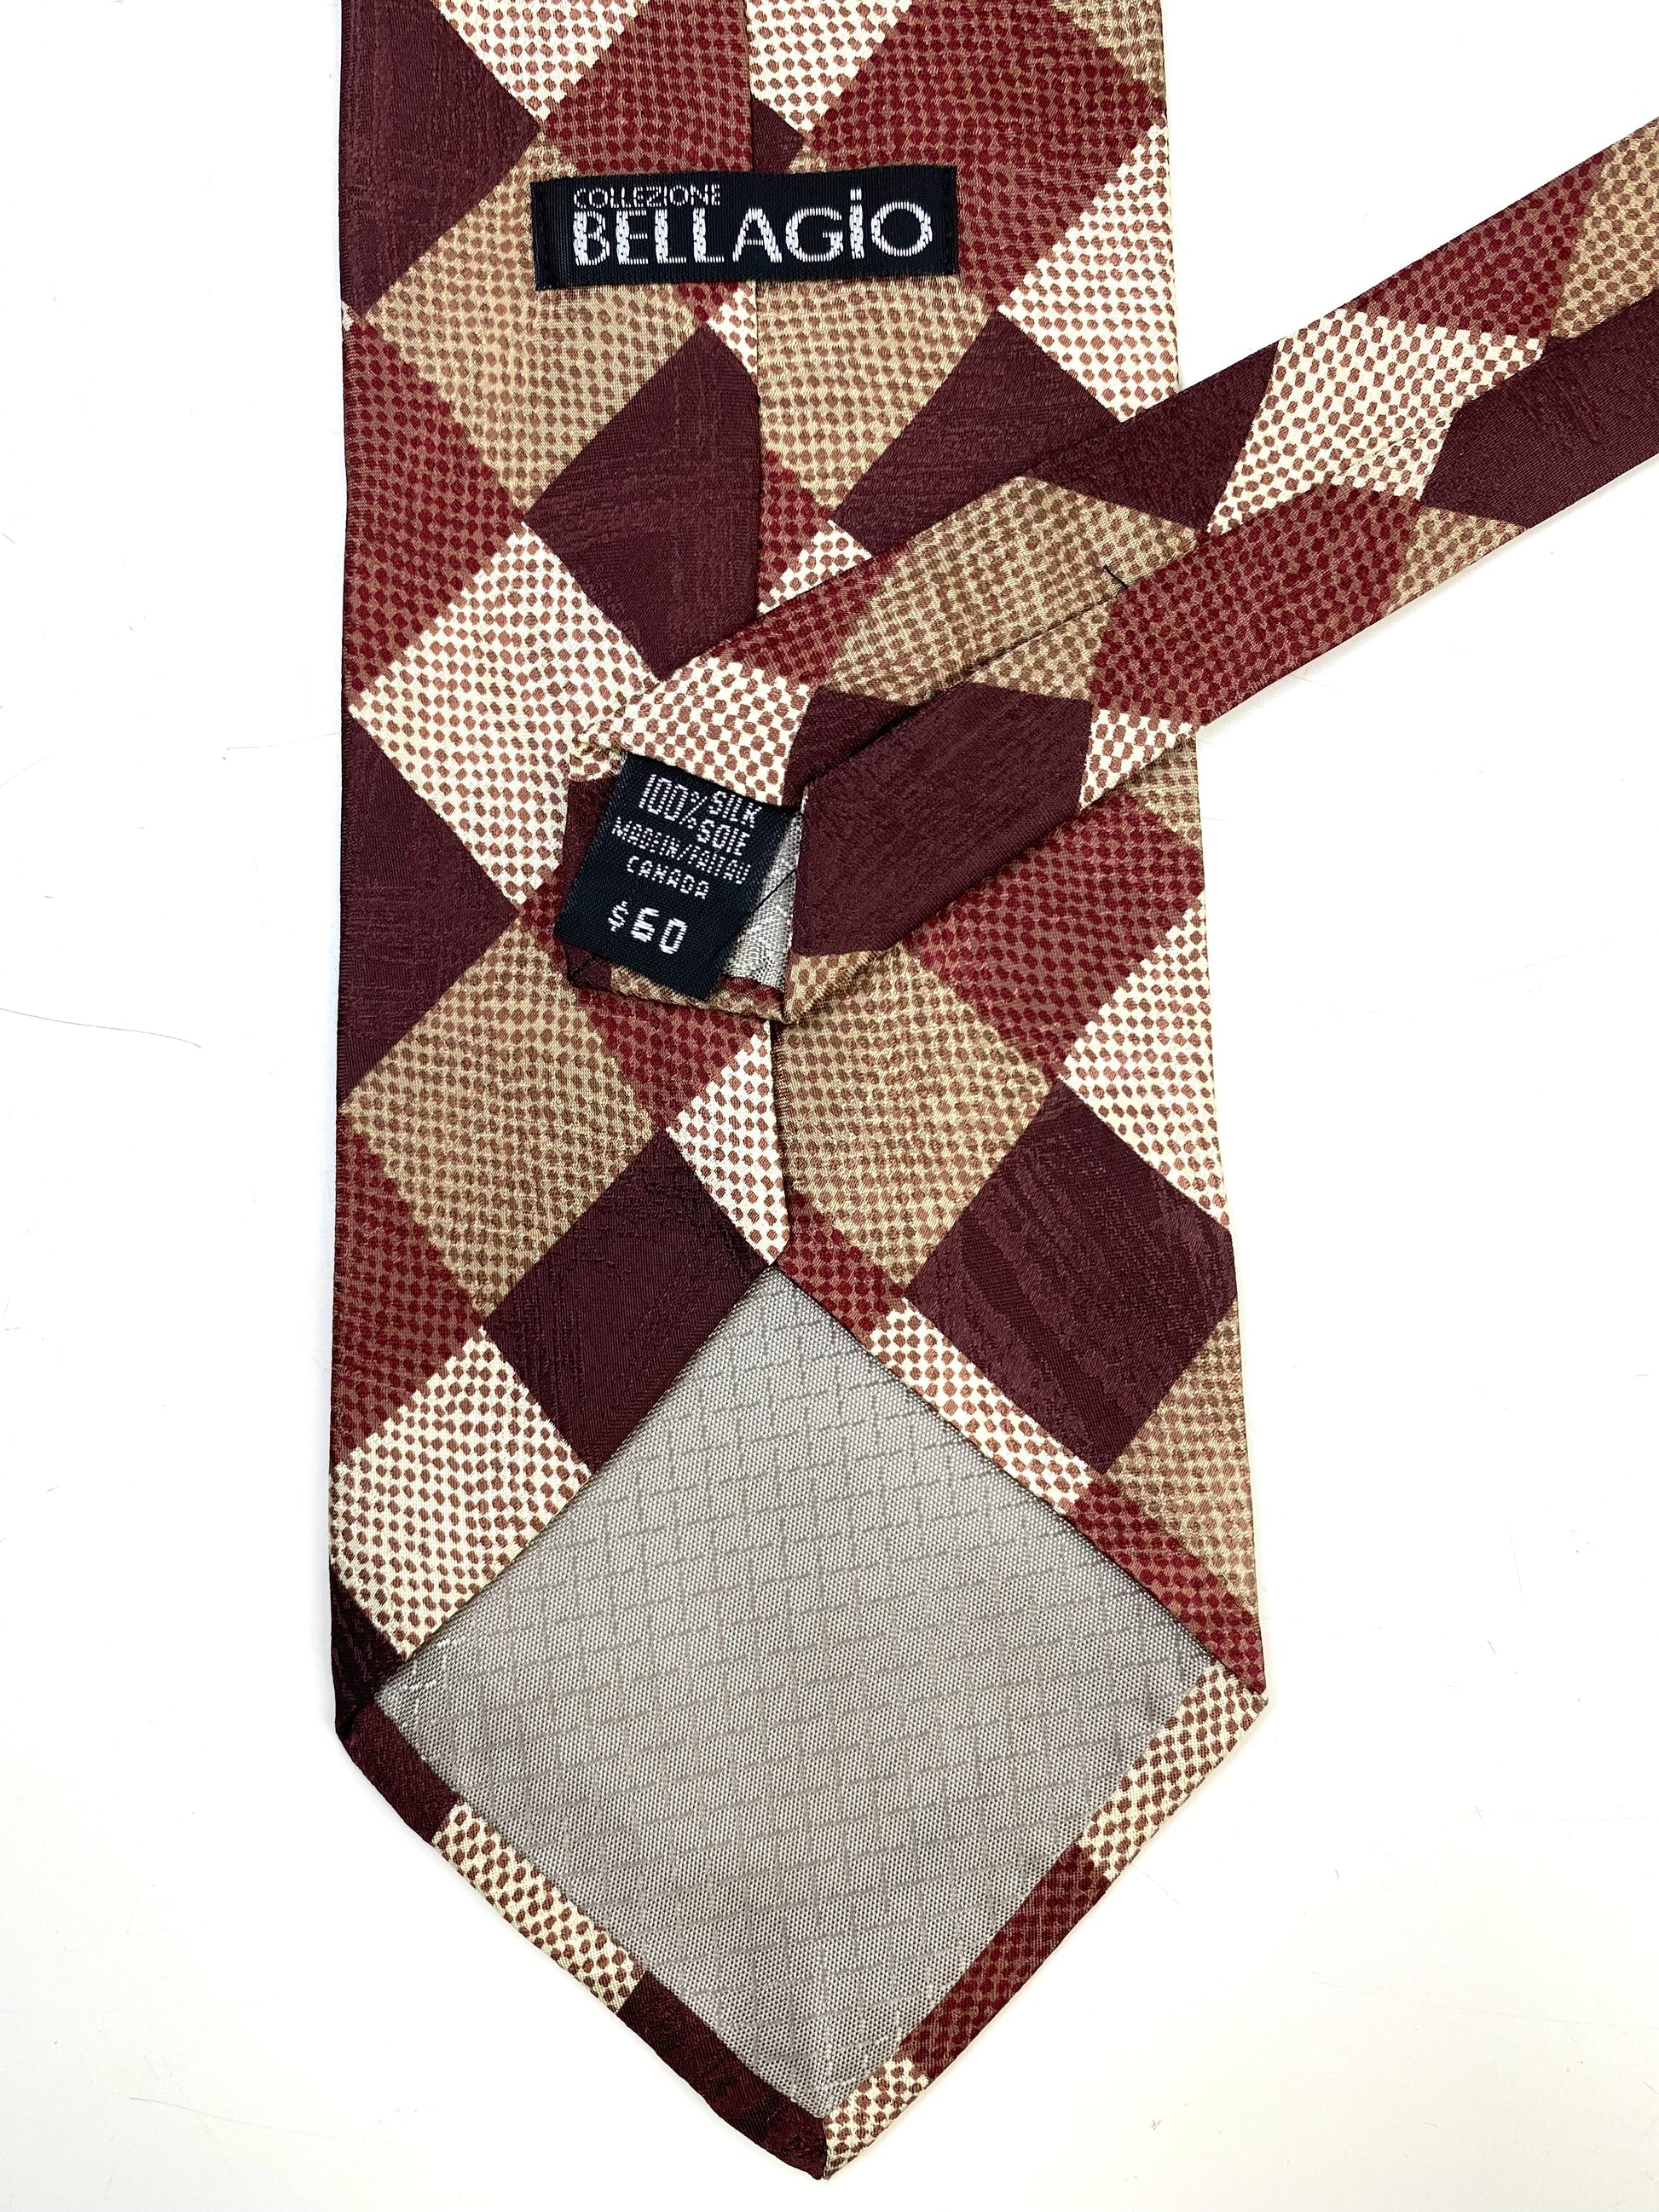 Back and labels of: 90s Deadstock Silk Necktie, Men's Vintage Brown Checkered Pattern Tie, NOS